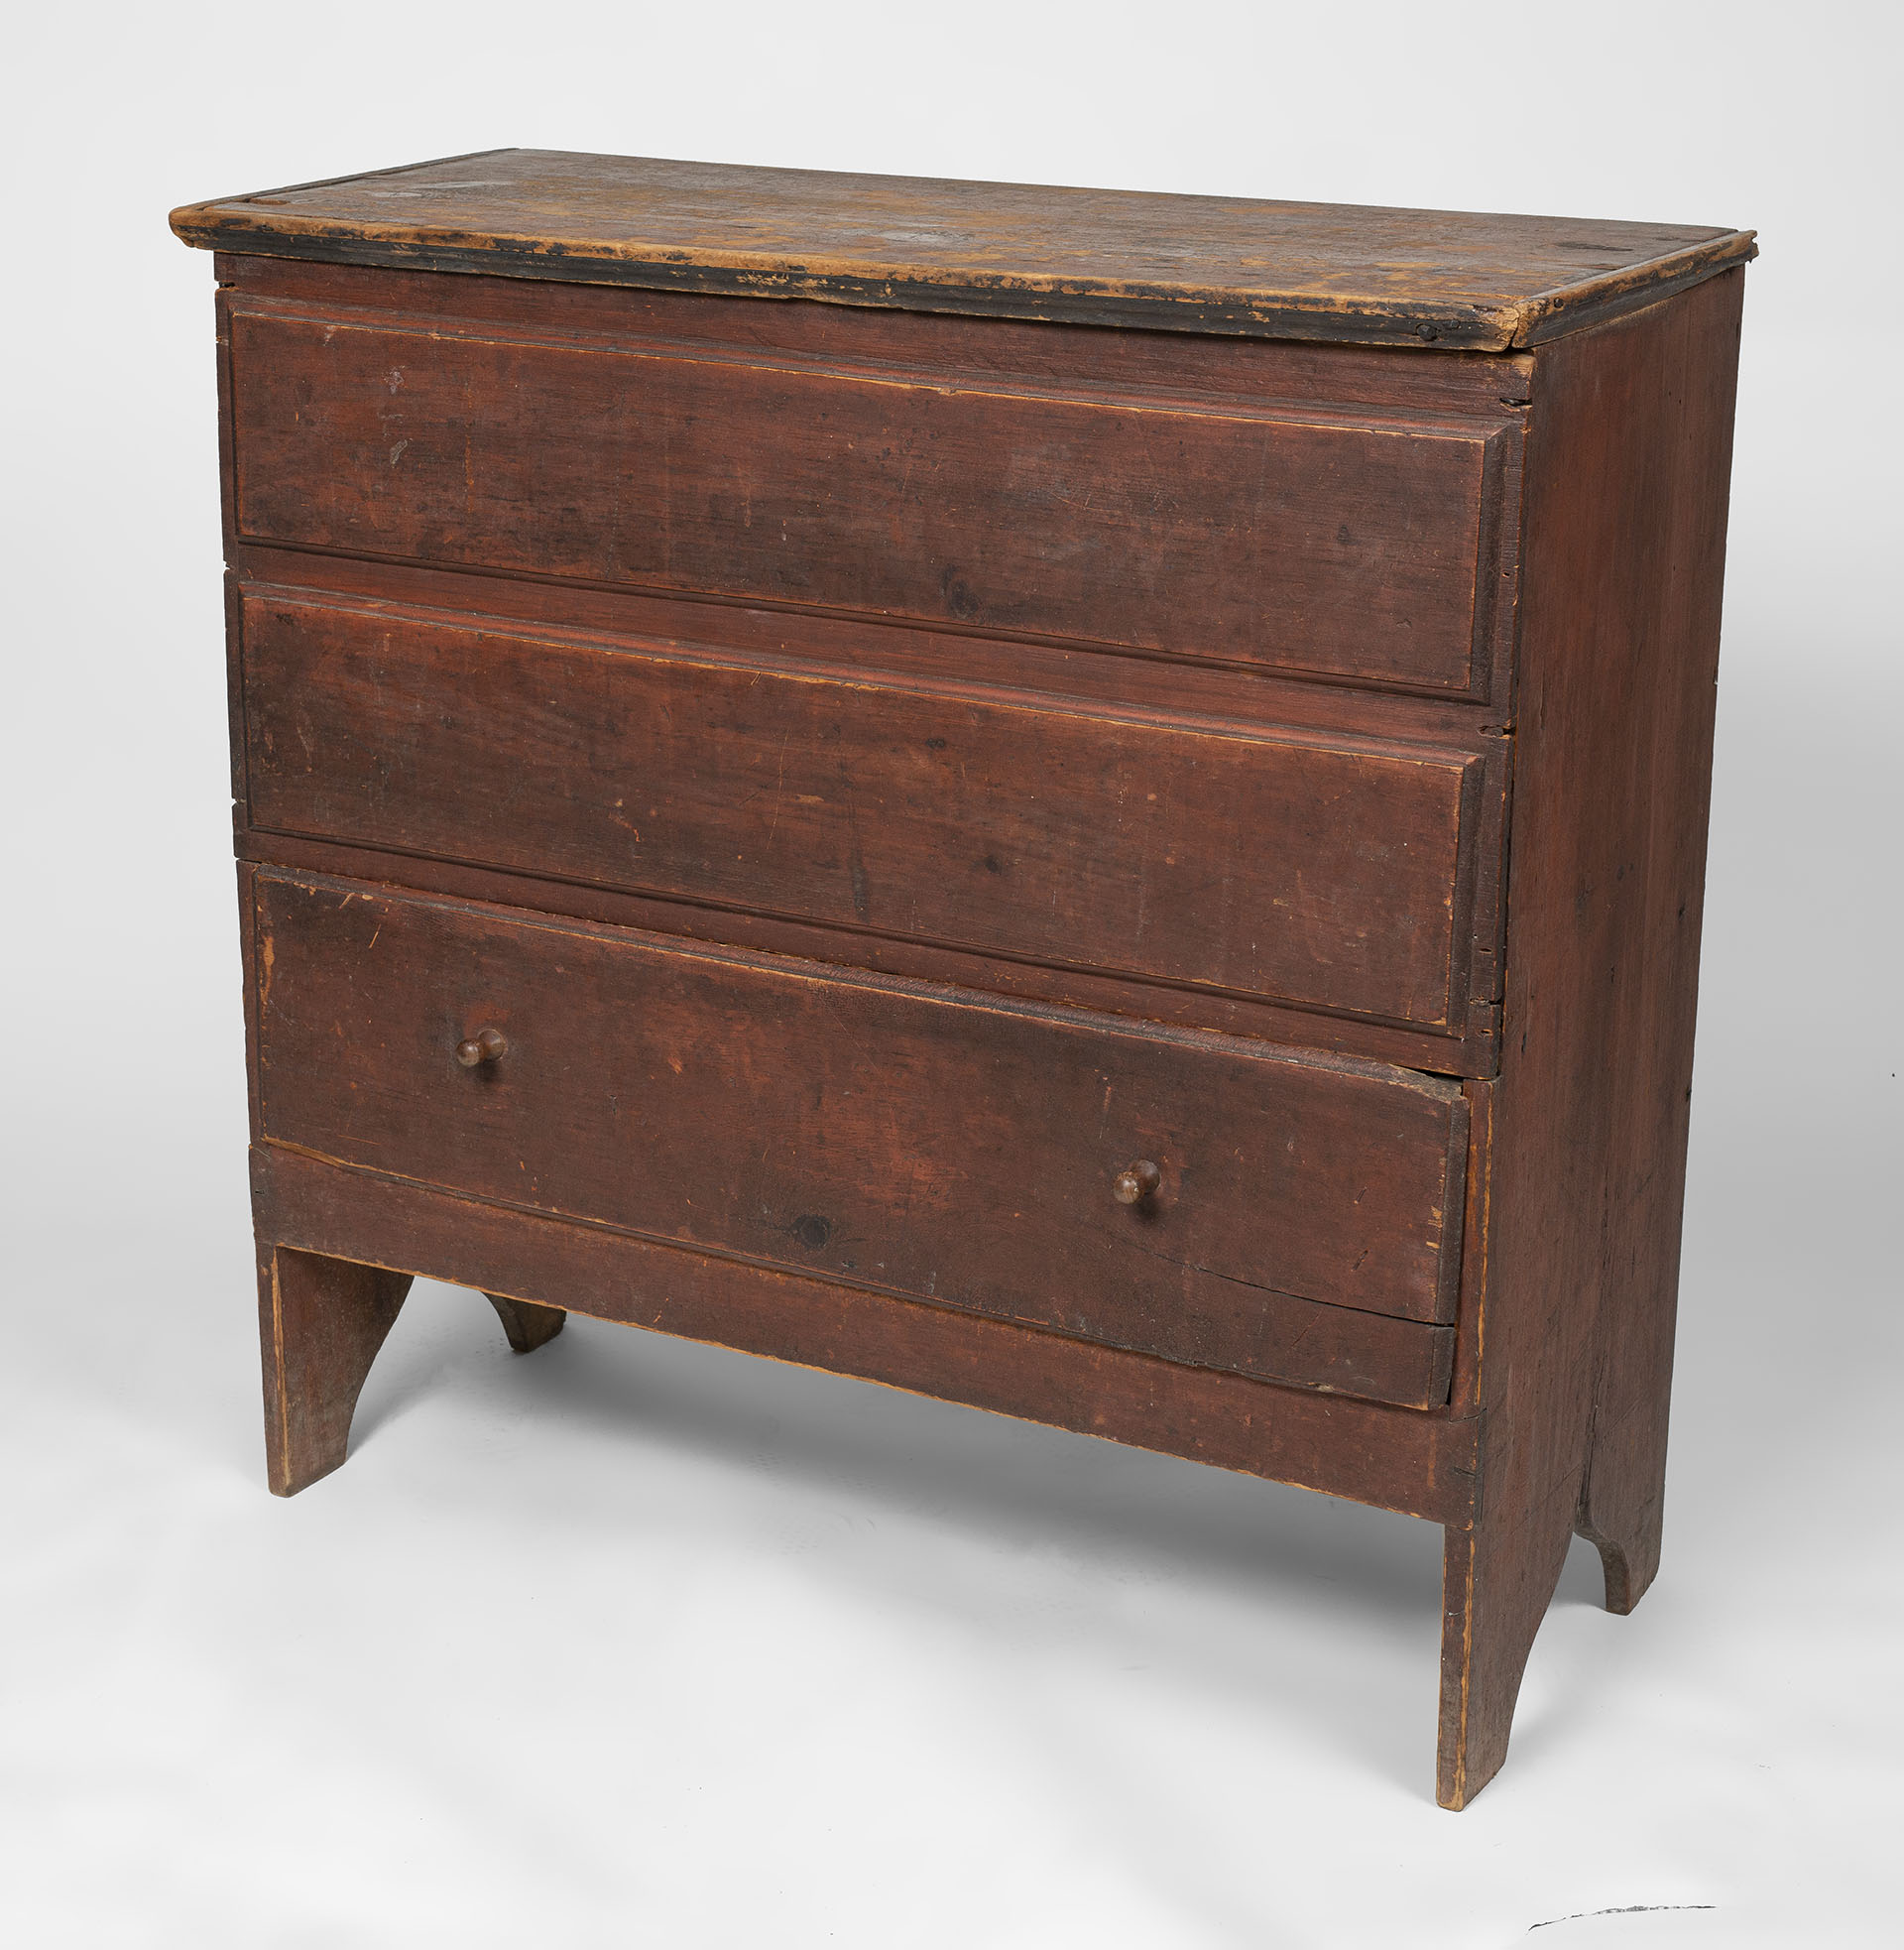 A small New England one drawer pine blanket chest